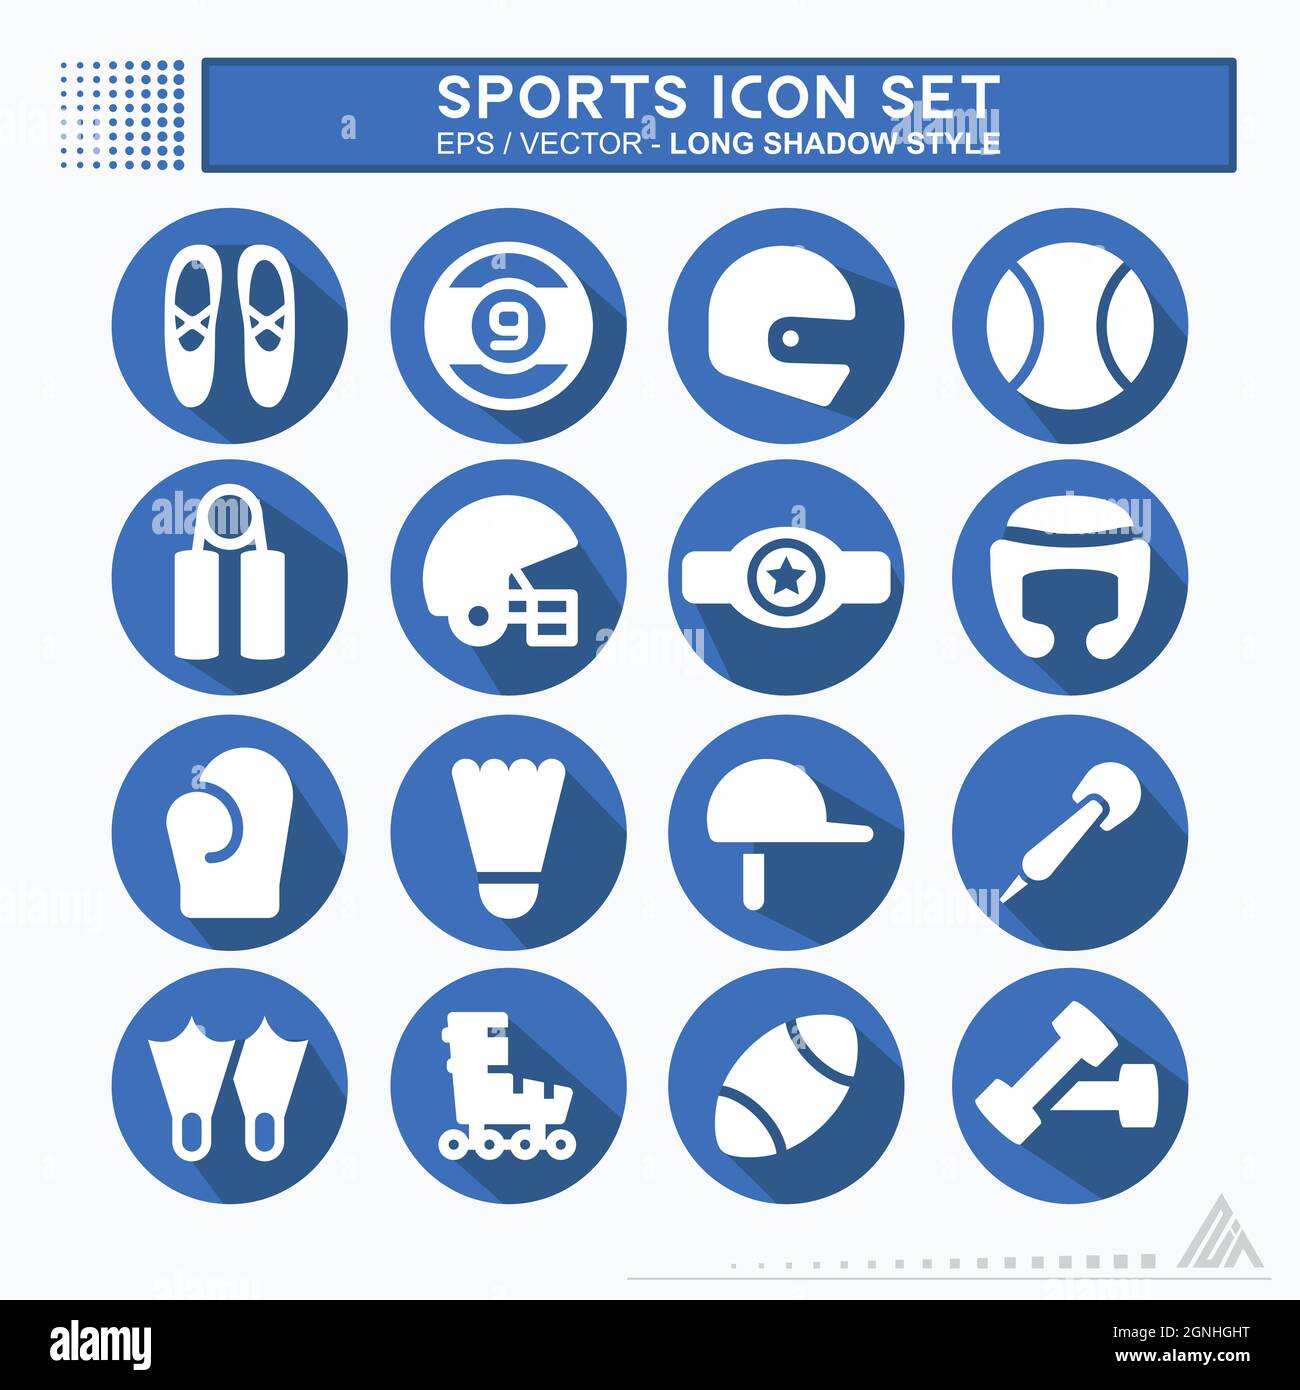 Set Icon Sports - Long Shadow Style - Simple illustration, Editable stroke, Design template vector, Good for prints, posters, advertisements, announce Stock Vector